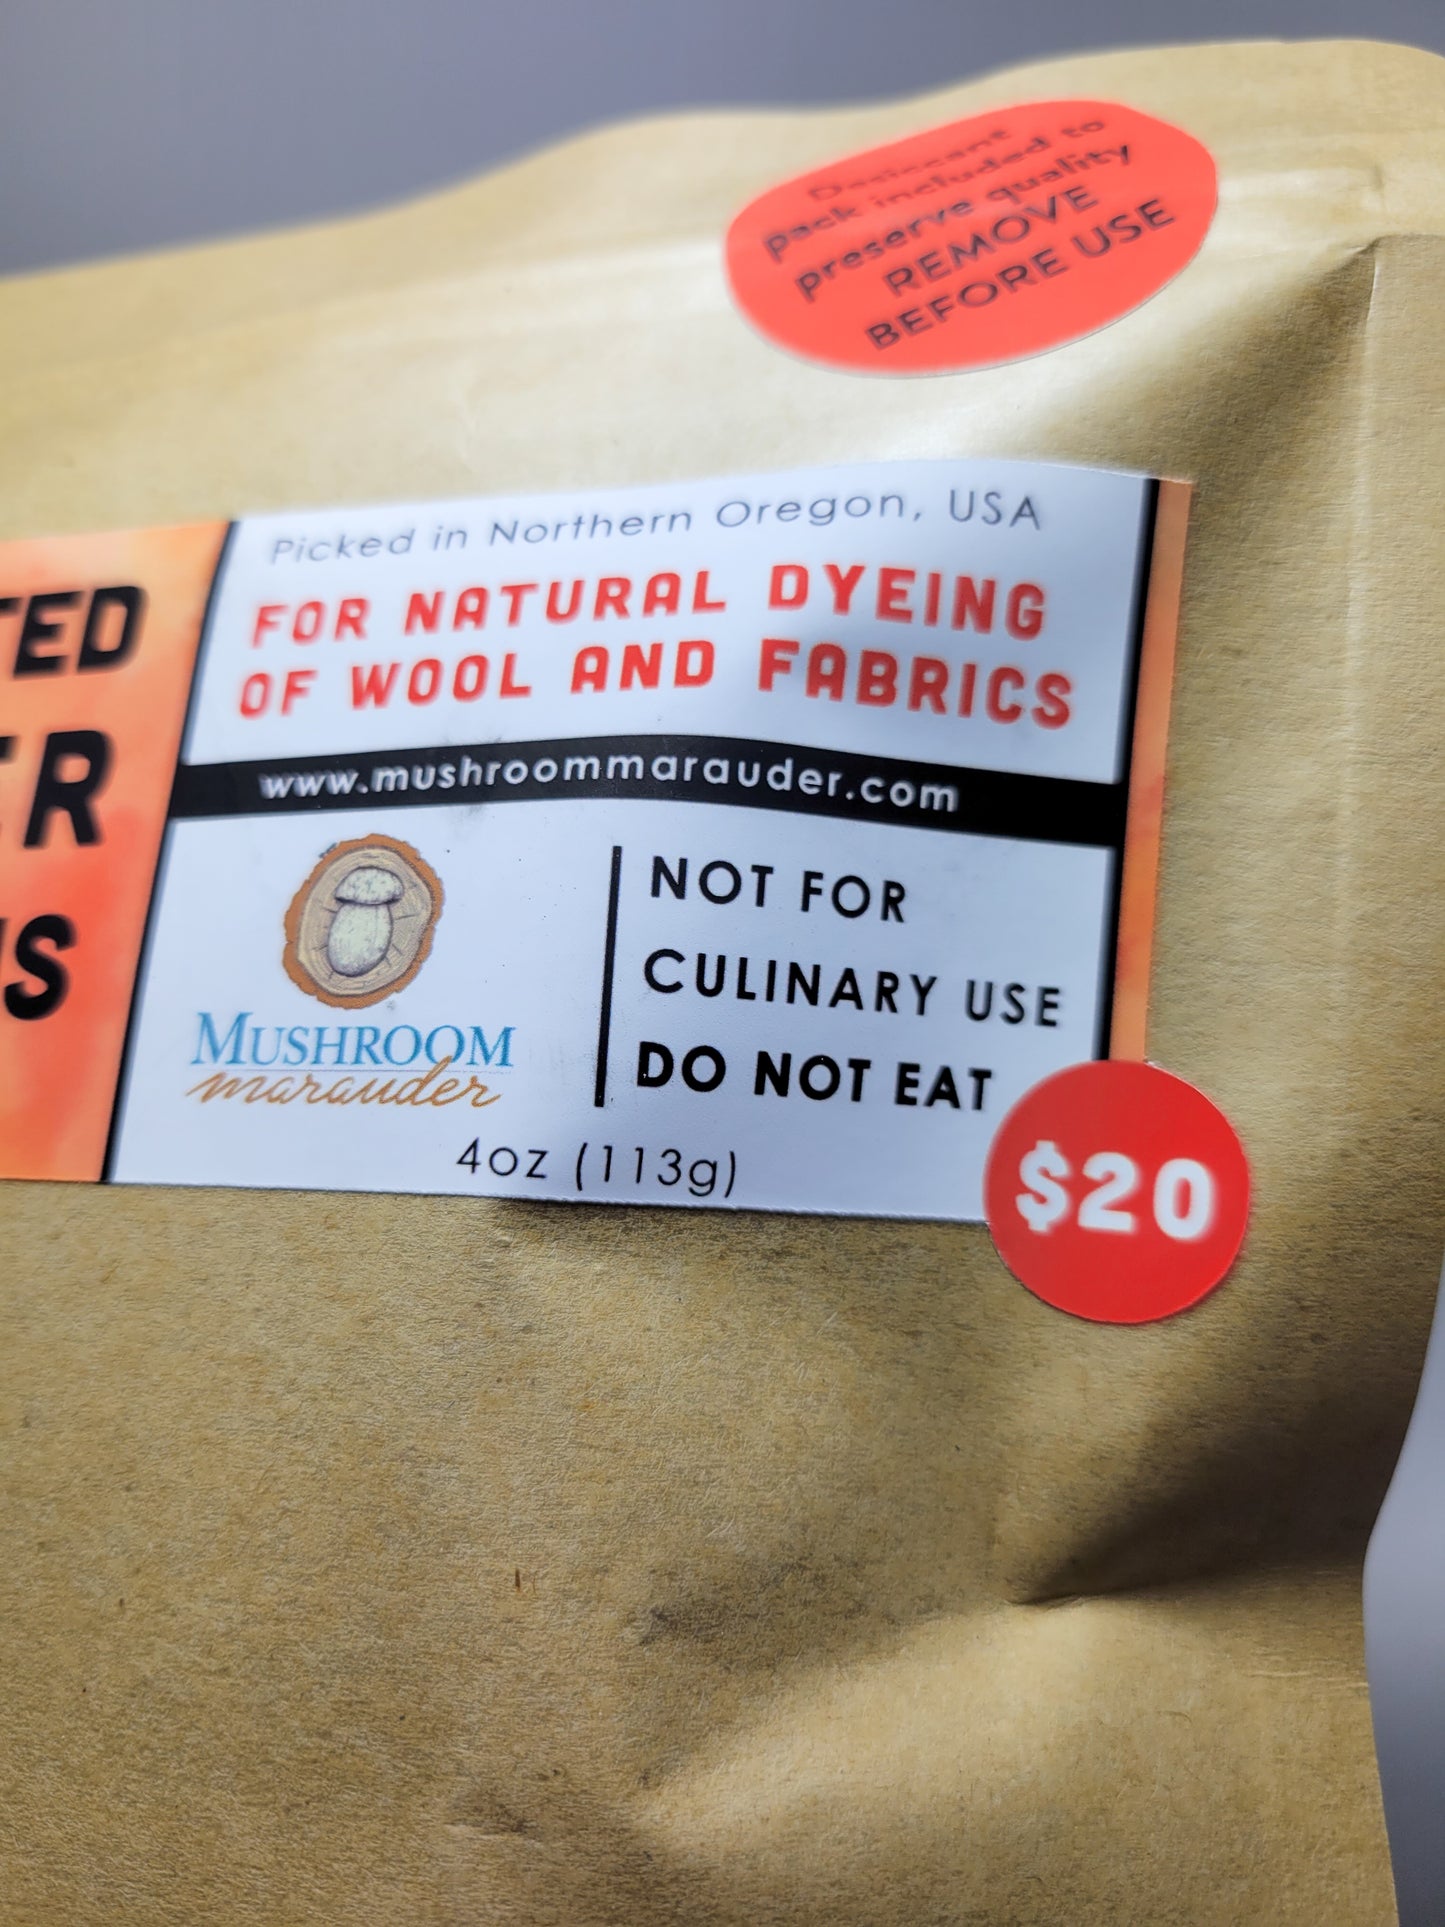 Dehydrated Lobster Mushrooms For Naturally Dyeing Wool and Fabrics *NOT FOR CULINARY USE, DO NOT EAT*